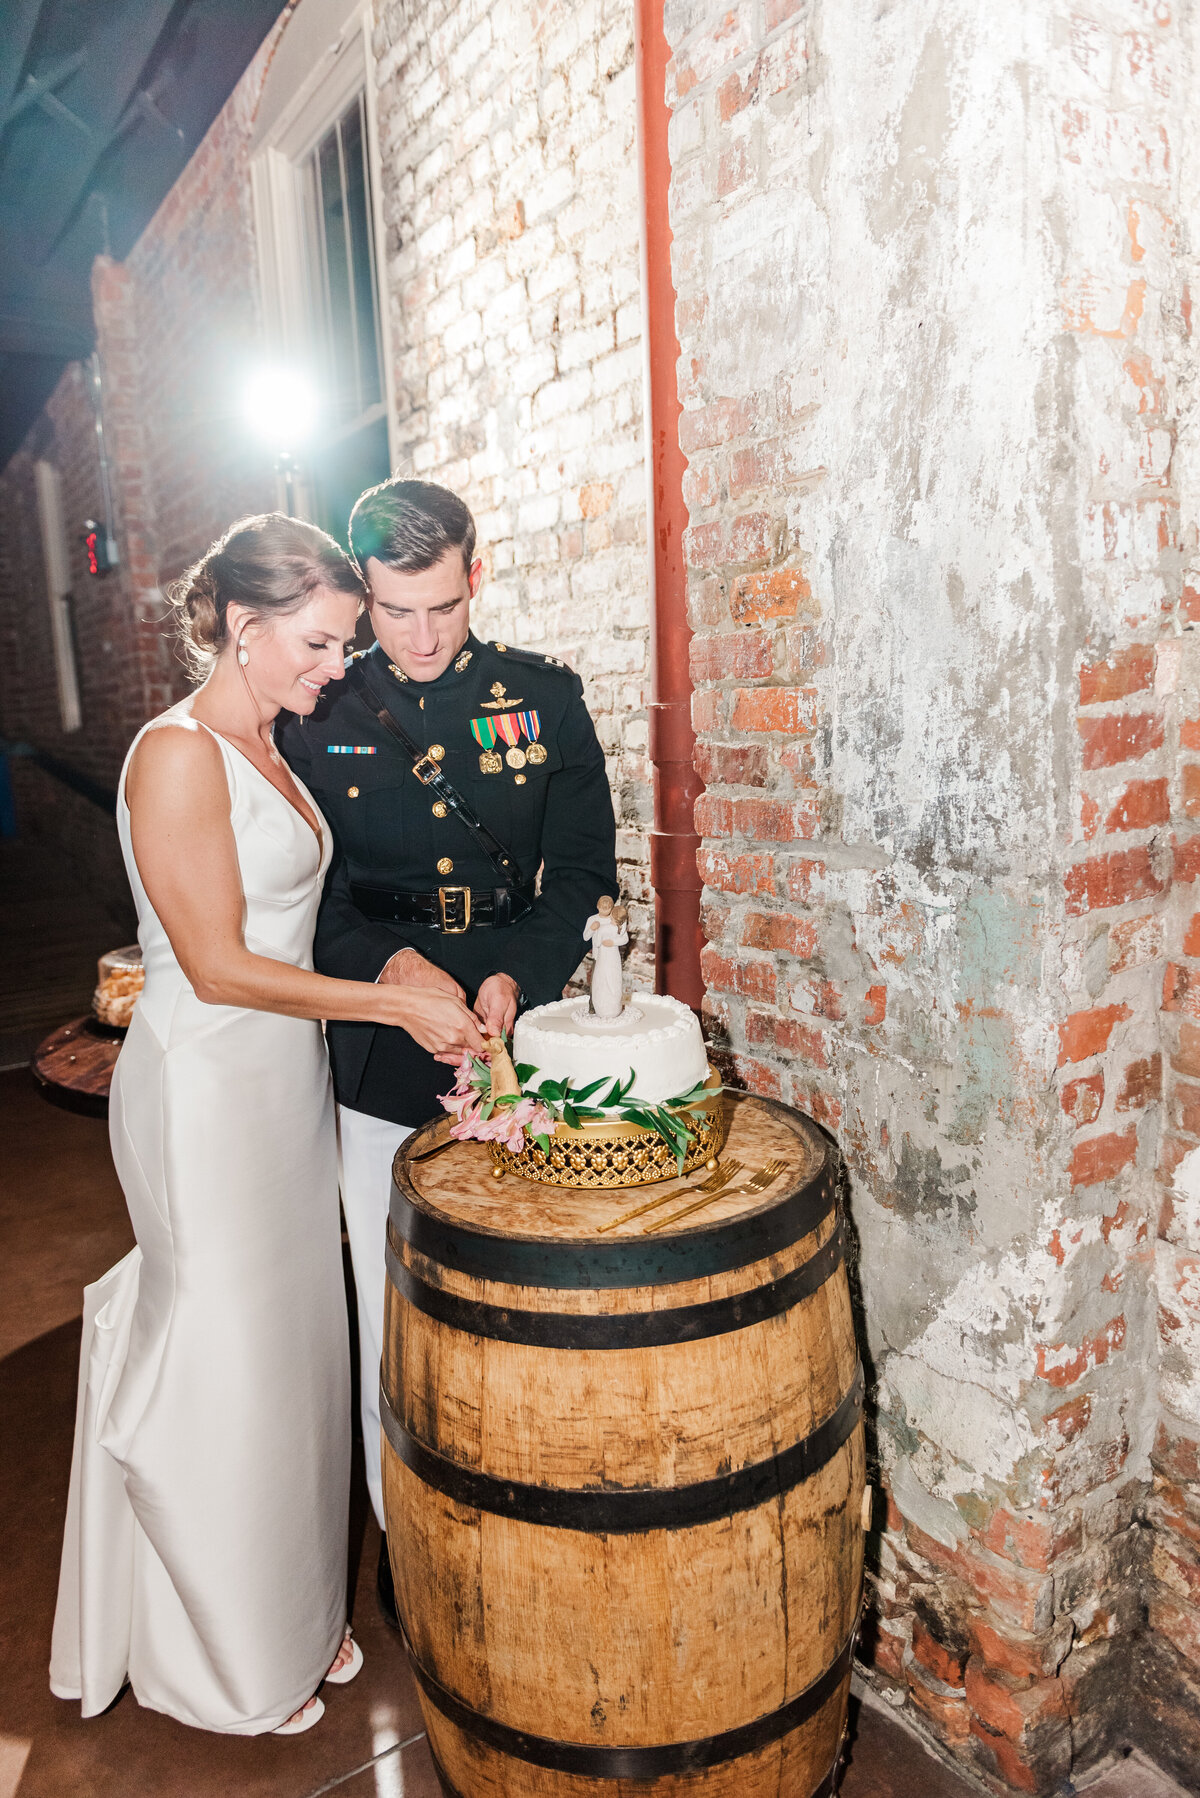 couple cutting the cake during their wedding in wilmington, nc